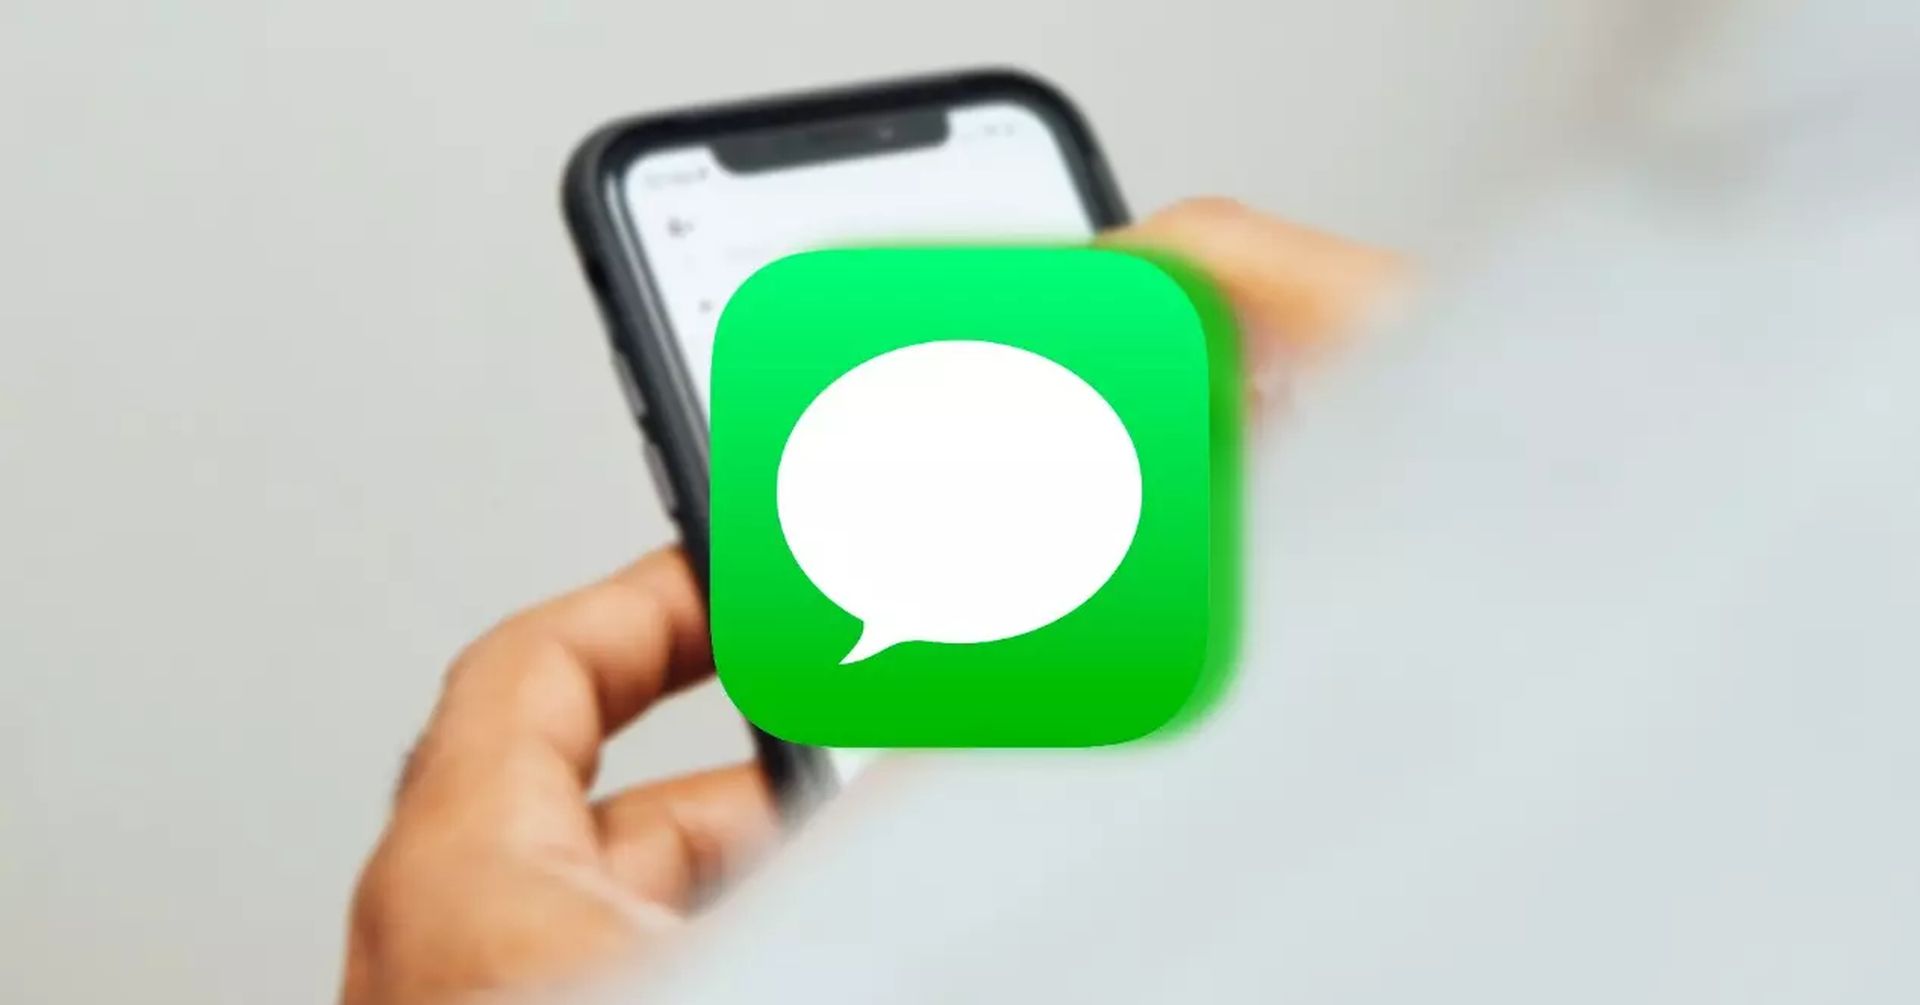 Sending static images on iMessage has long been possible but in this article we'll be teaching you how to send animated iMessage GIFs easily in a few steps.